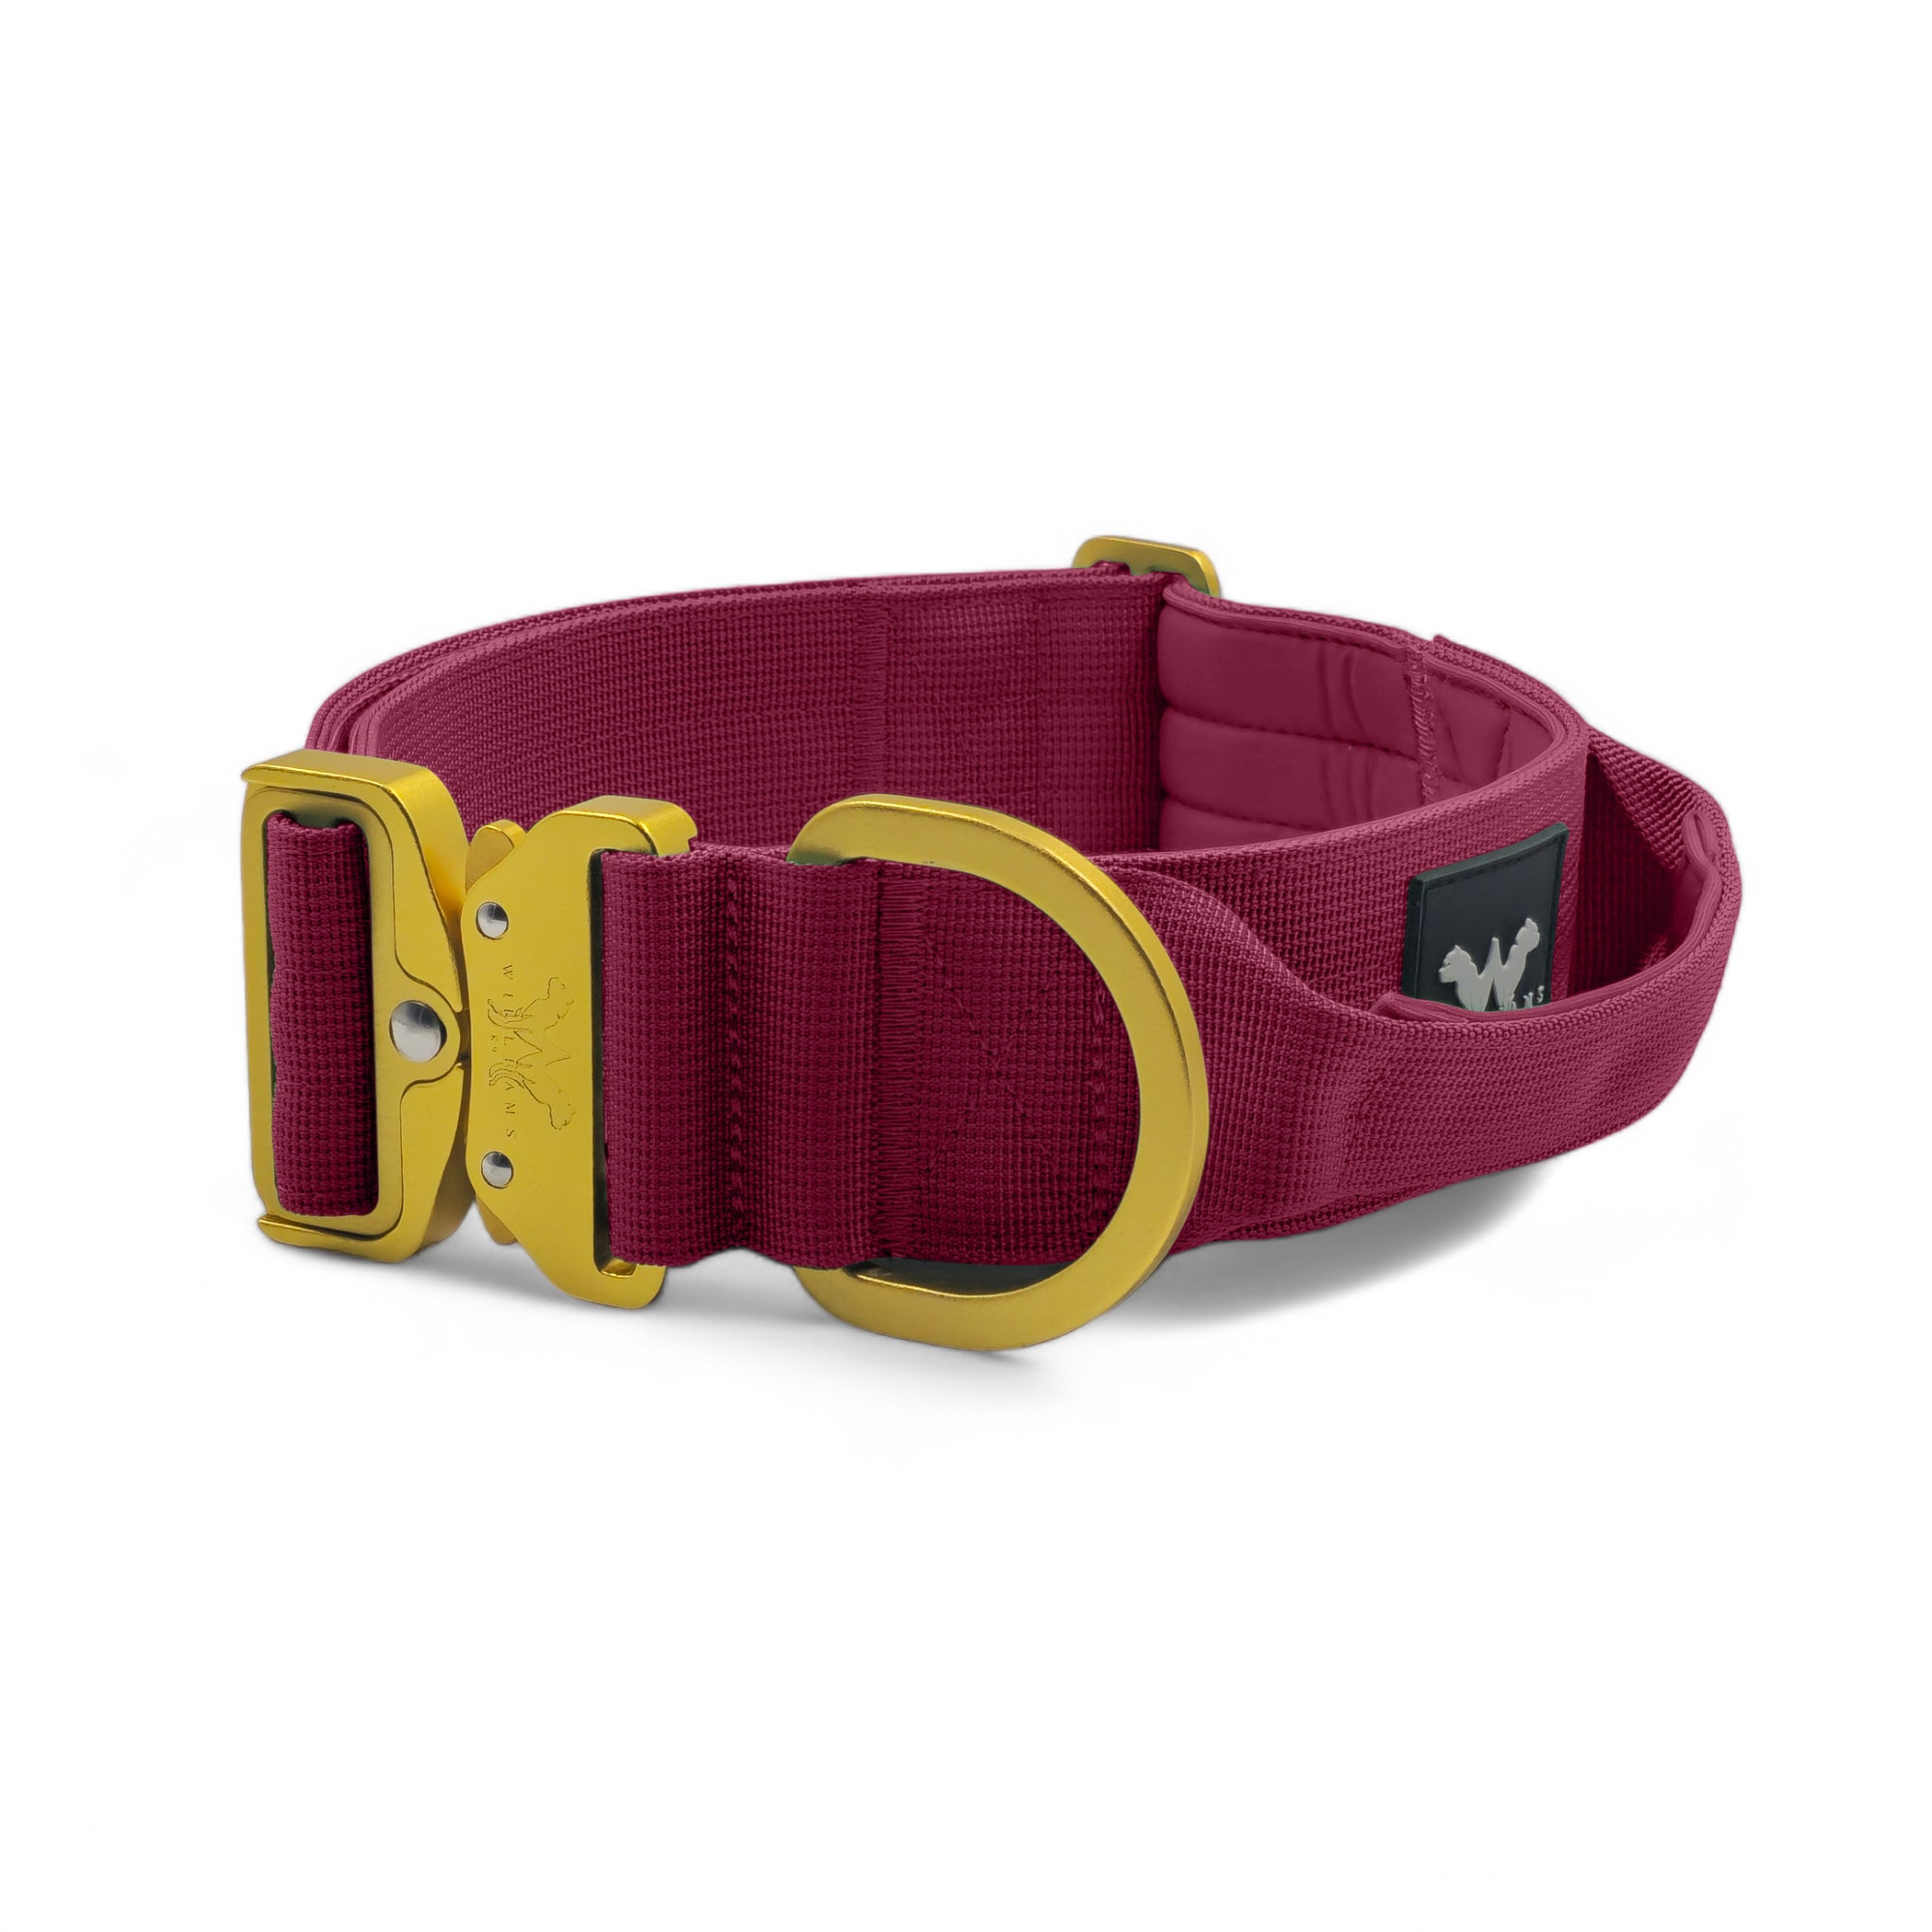 Light Tactical Collar 5CM Cherry Red | Quad Stitched Nylon Lightweight Gold Aluminium Buckle + D Ring Adjustable Collar With Handle